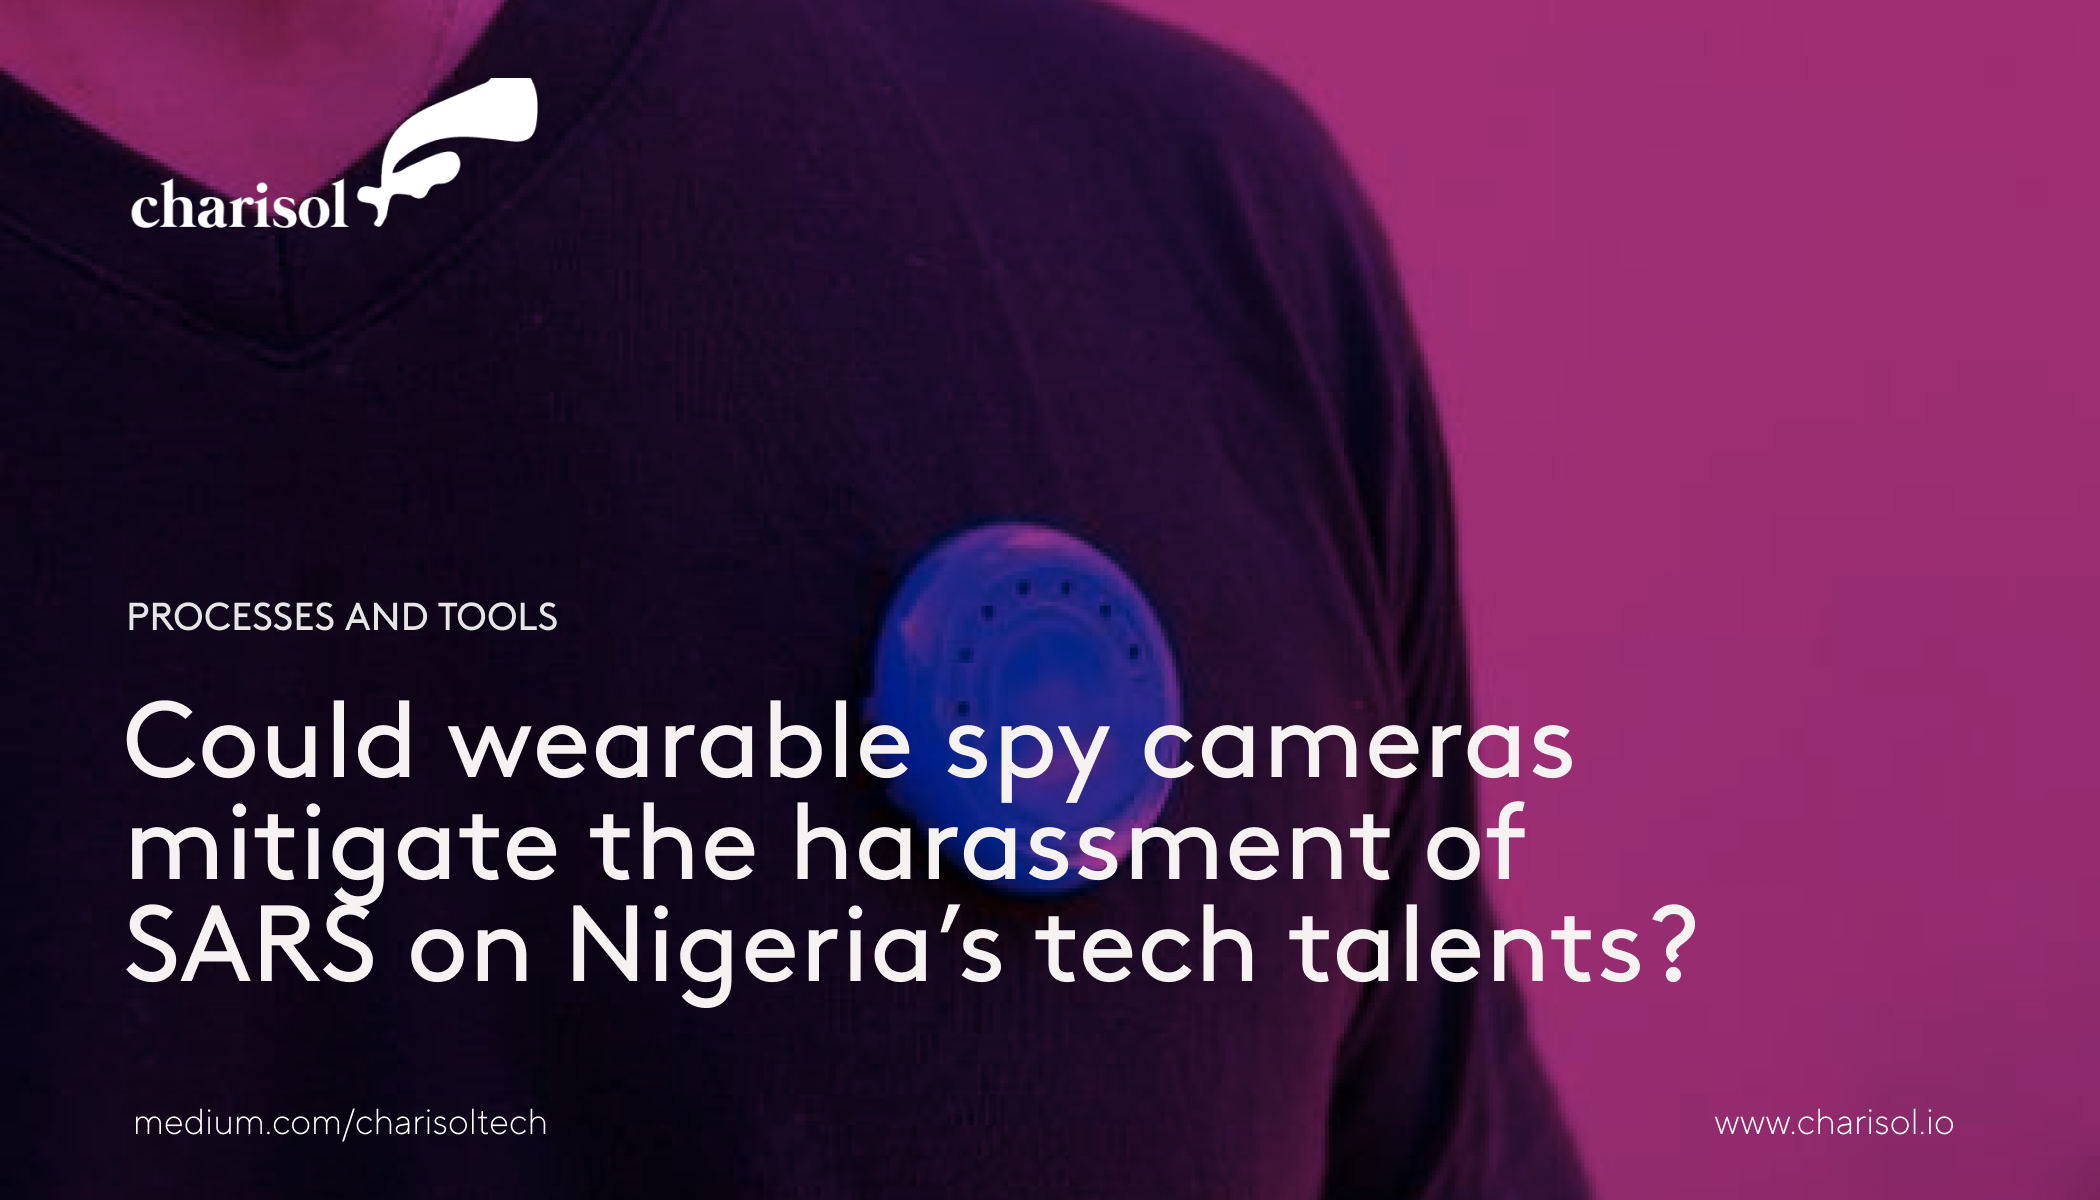 Could wearable spy cameras mitigate the harassment of SARS on Nigeria's tech talents?